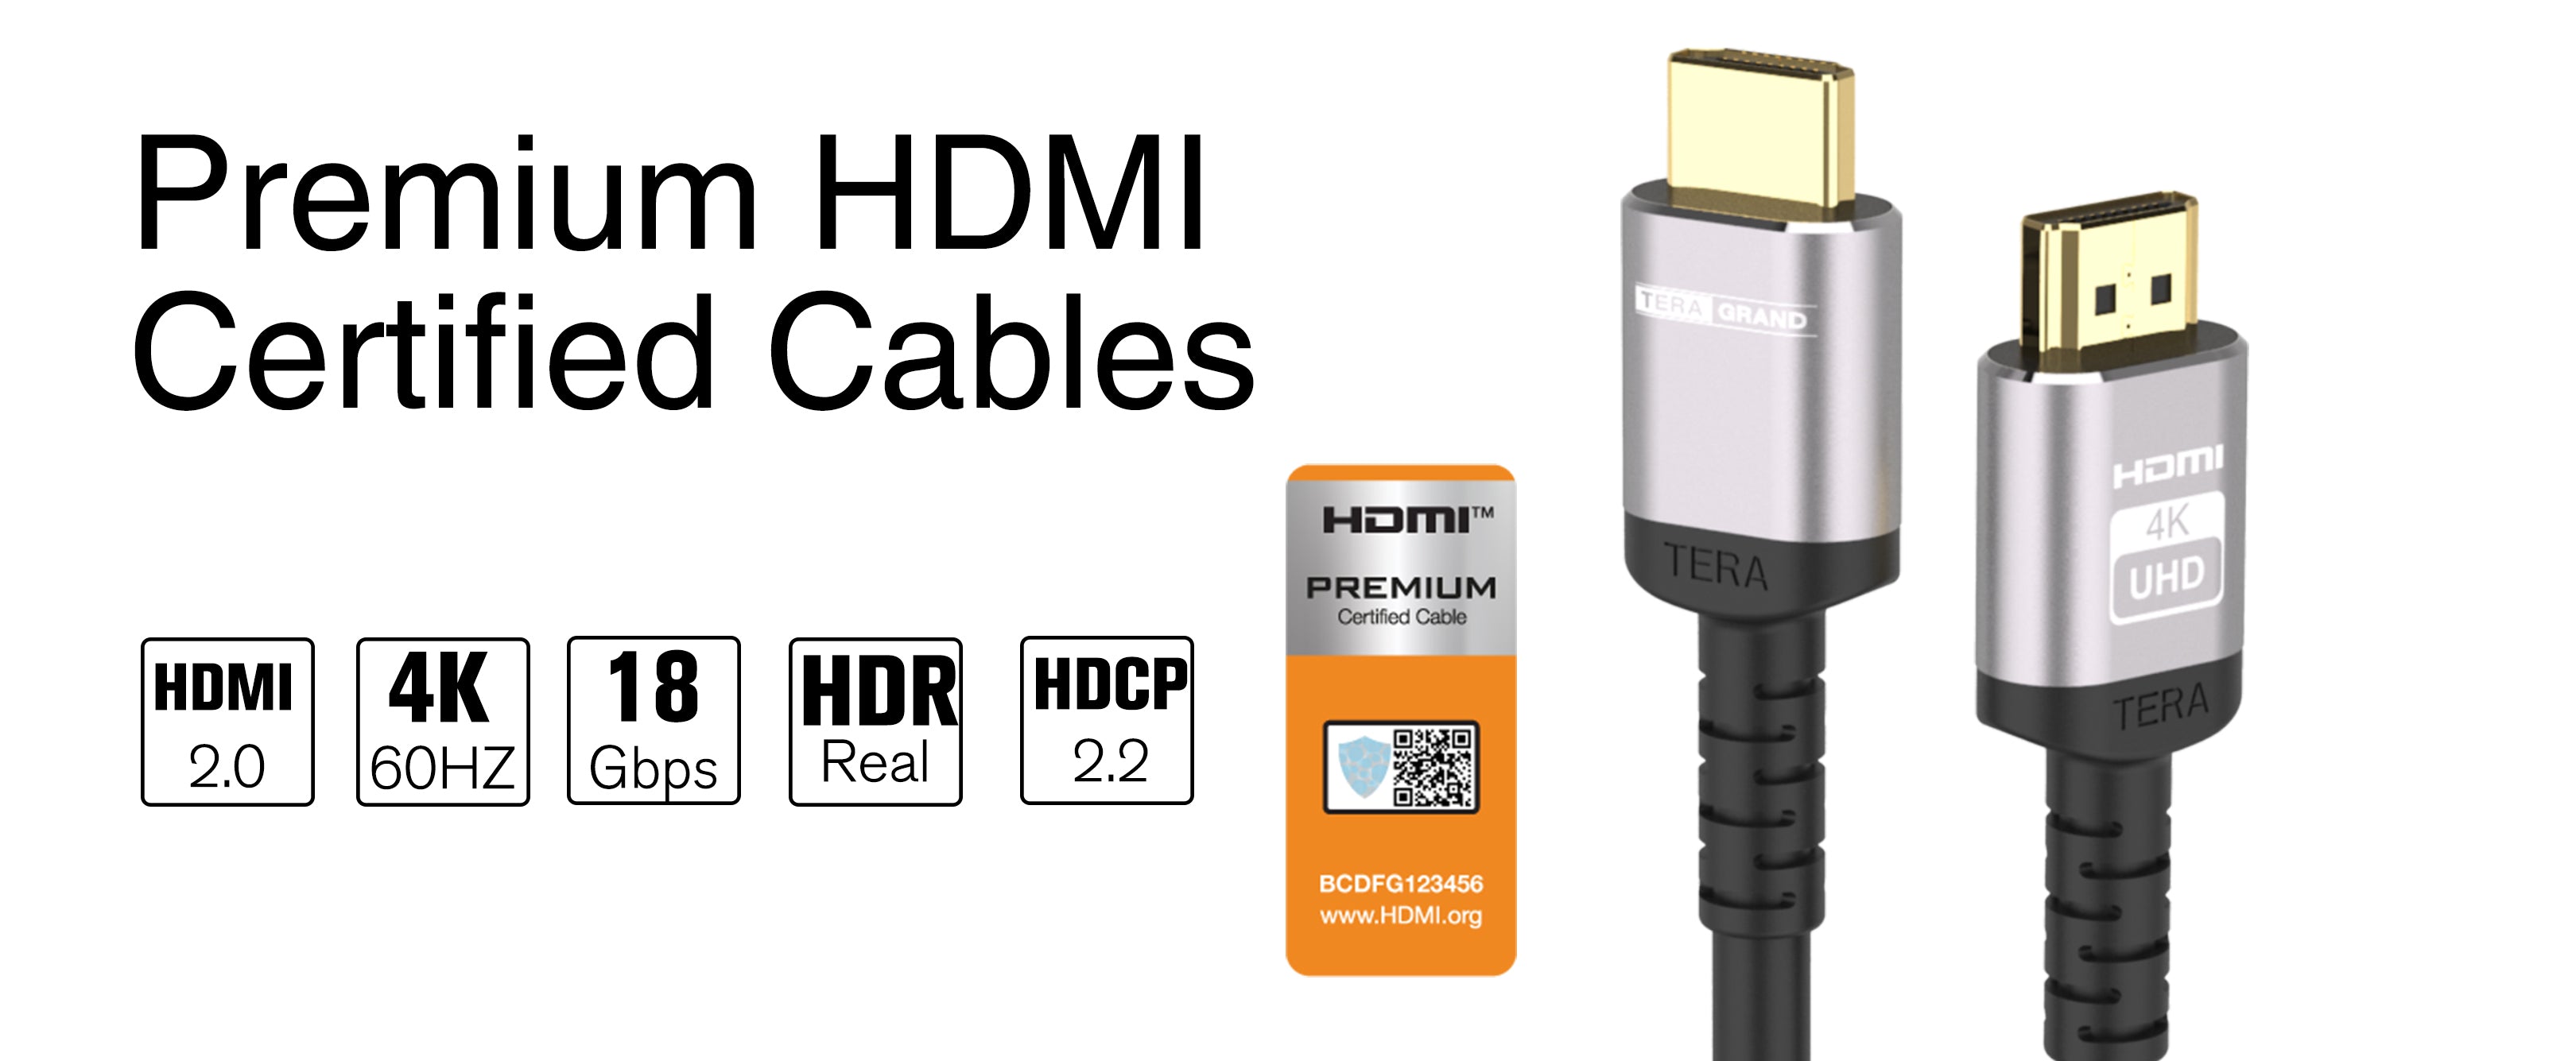 4K Premium HDMI Certified Cable with Aluminum housing, Supports HDMI 2.0 4K  HDR Ultra HD, 18 Gbps, 4K 60Hz, 6 Feet